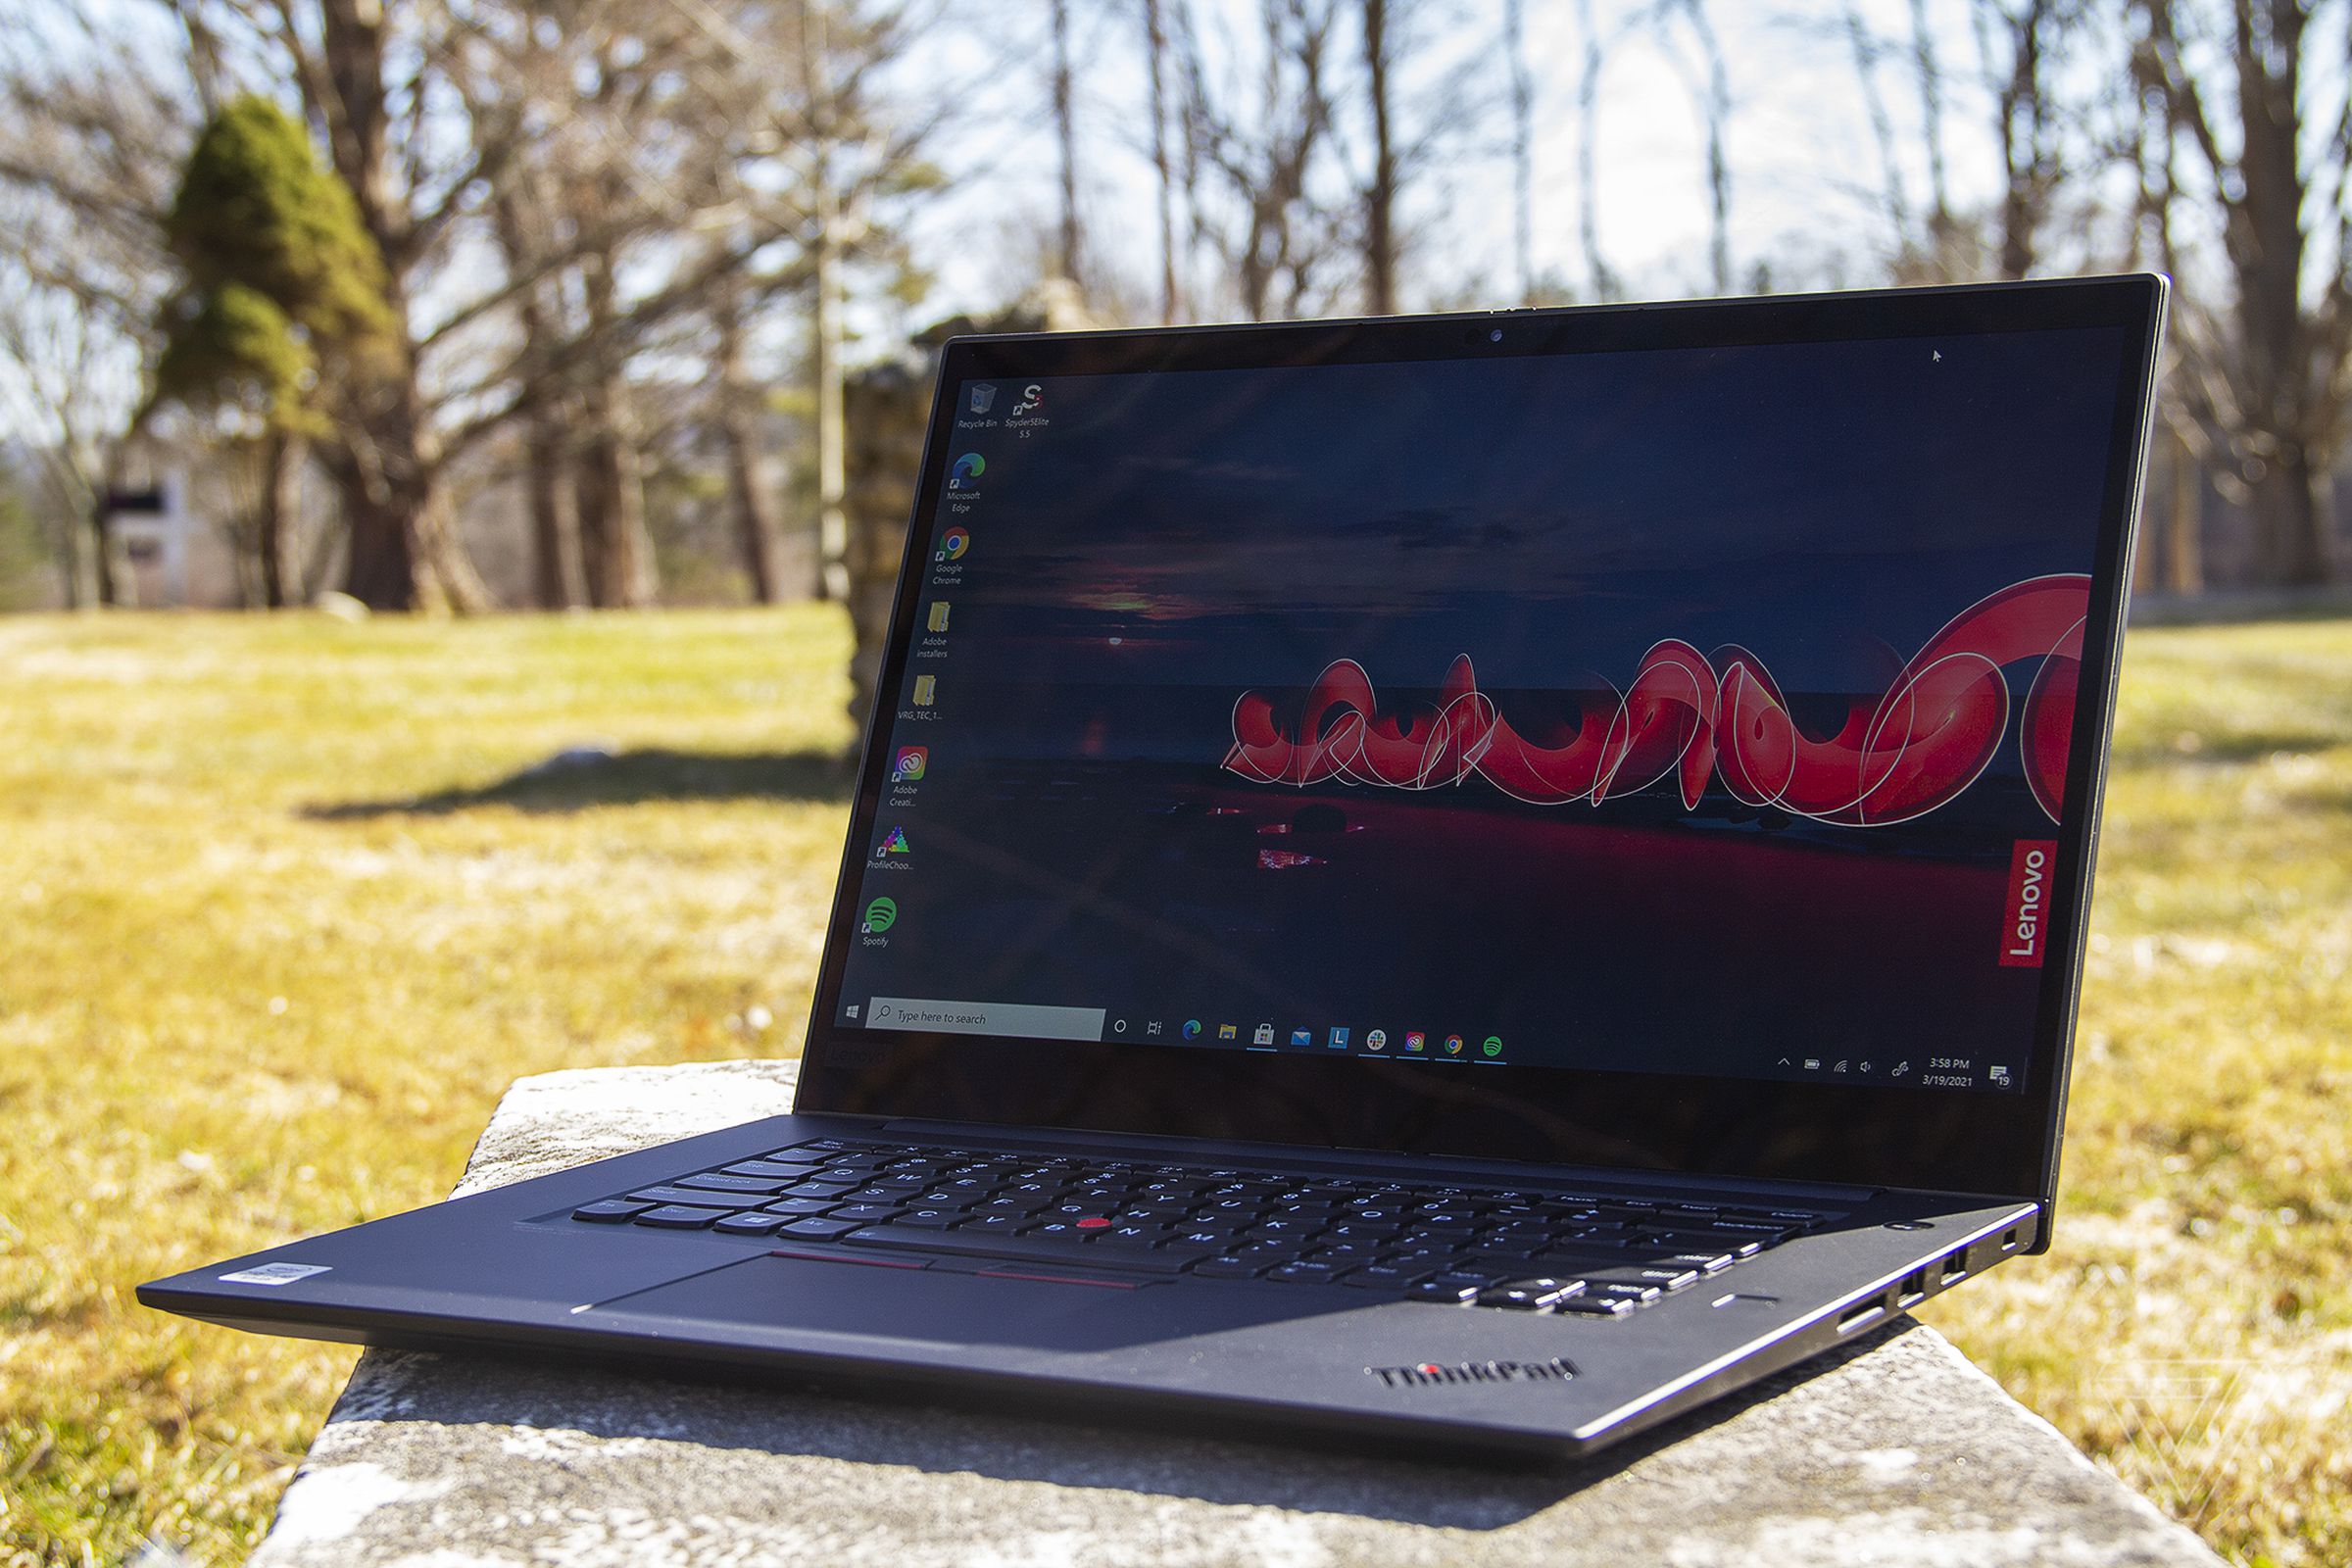 The Thinkpad X1 Extreme Gen 3 angled to the left, open. The screen displays a nighttime outdoor scene with the Lenovo logo on the right side. 